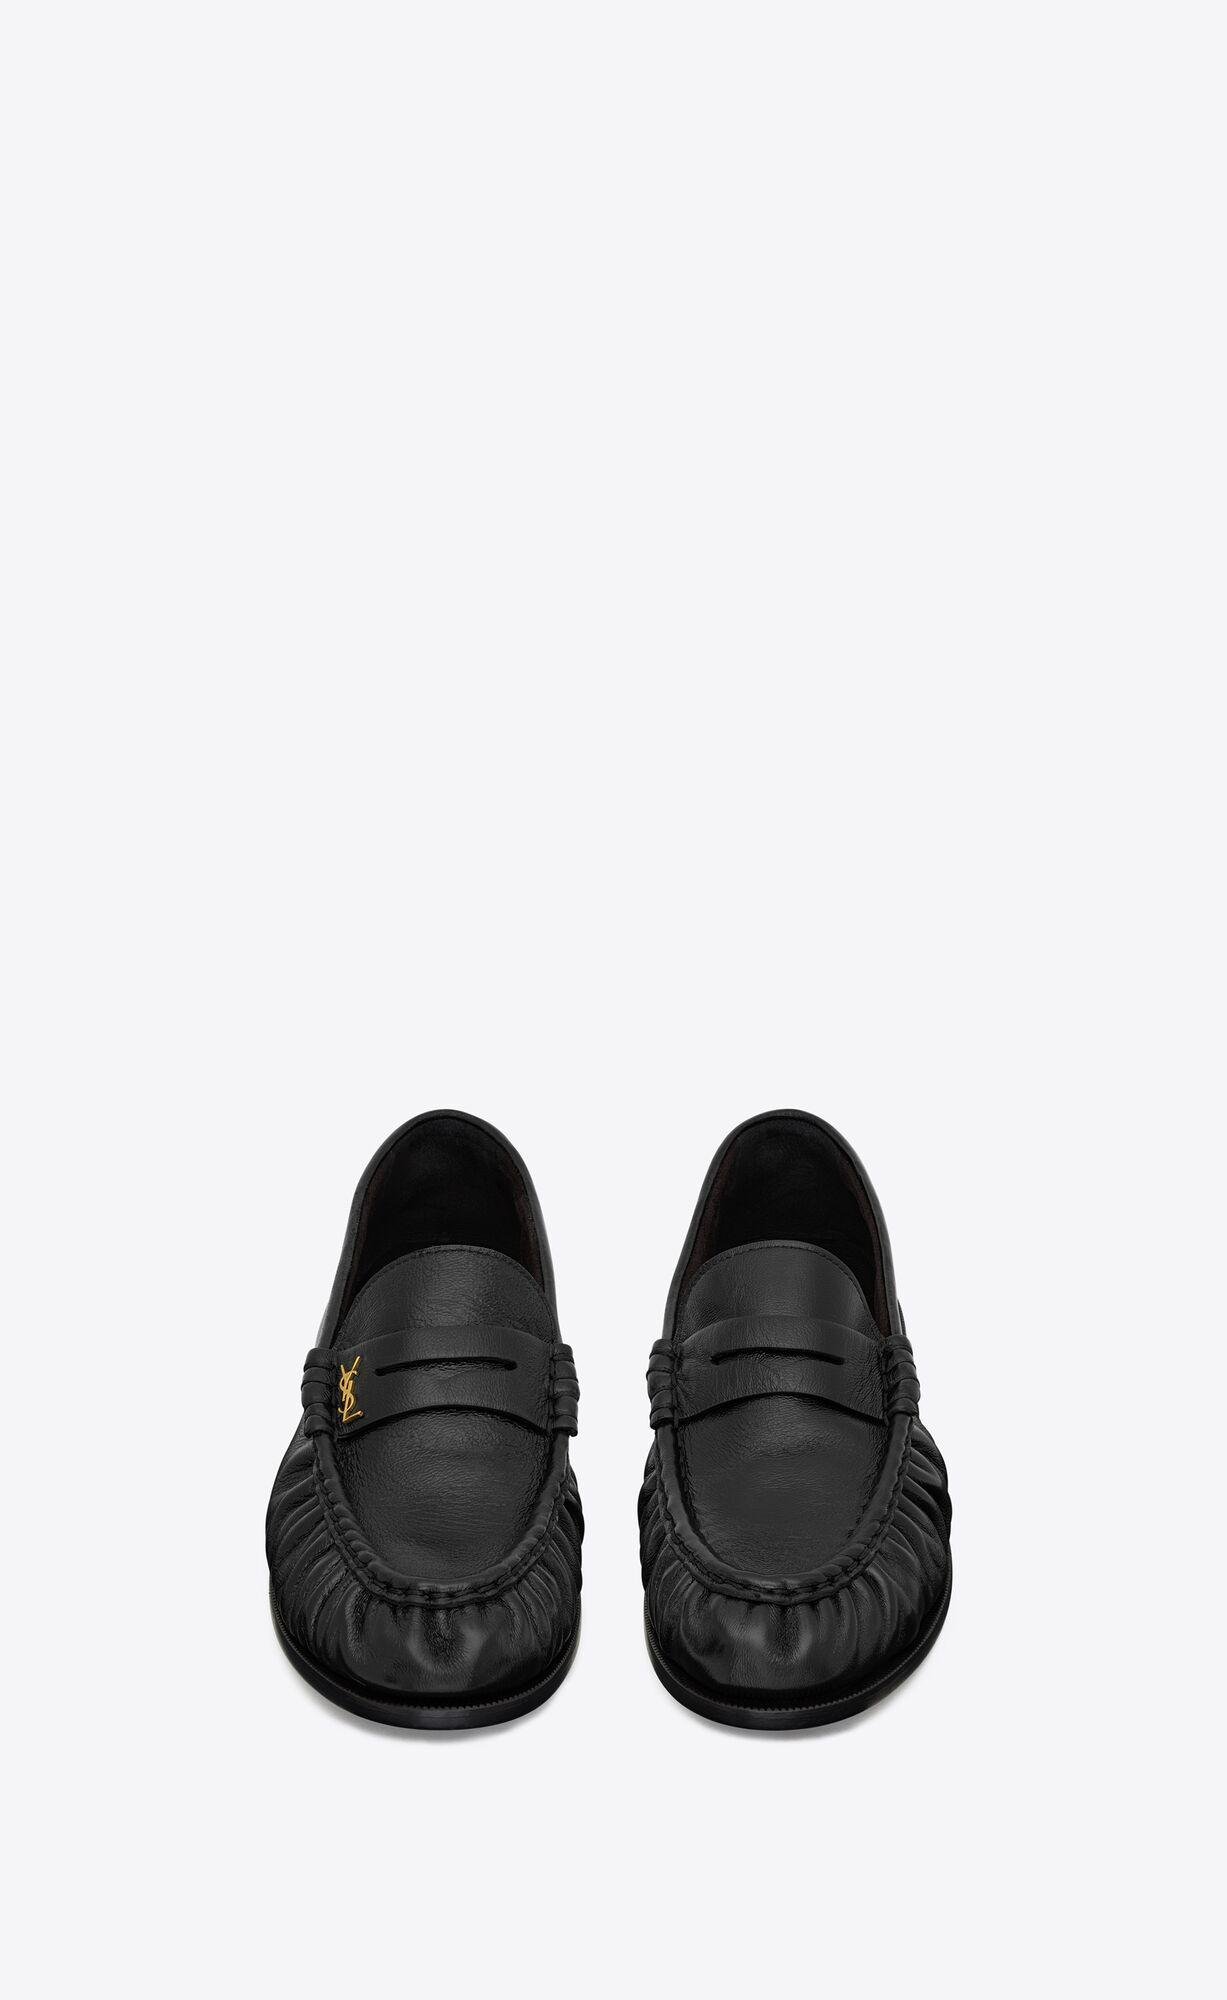 le loafer penny slippers in shiny creased leather by SAINT LAURENT